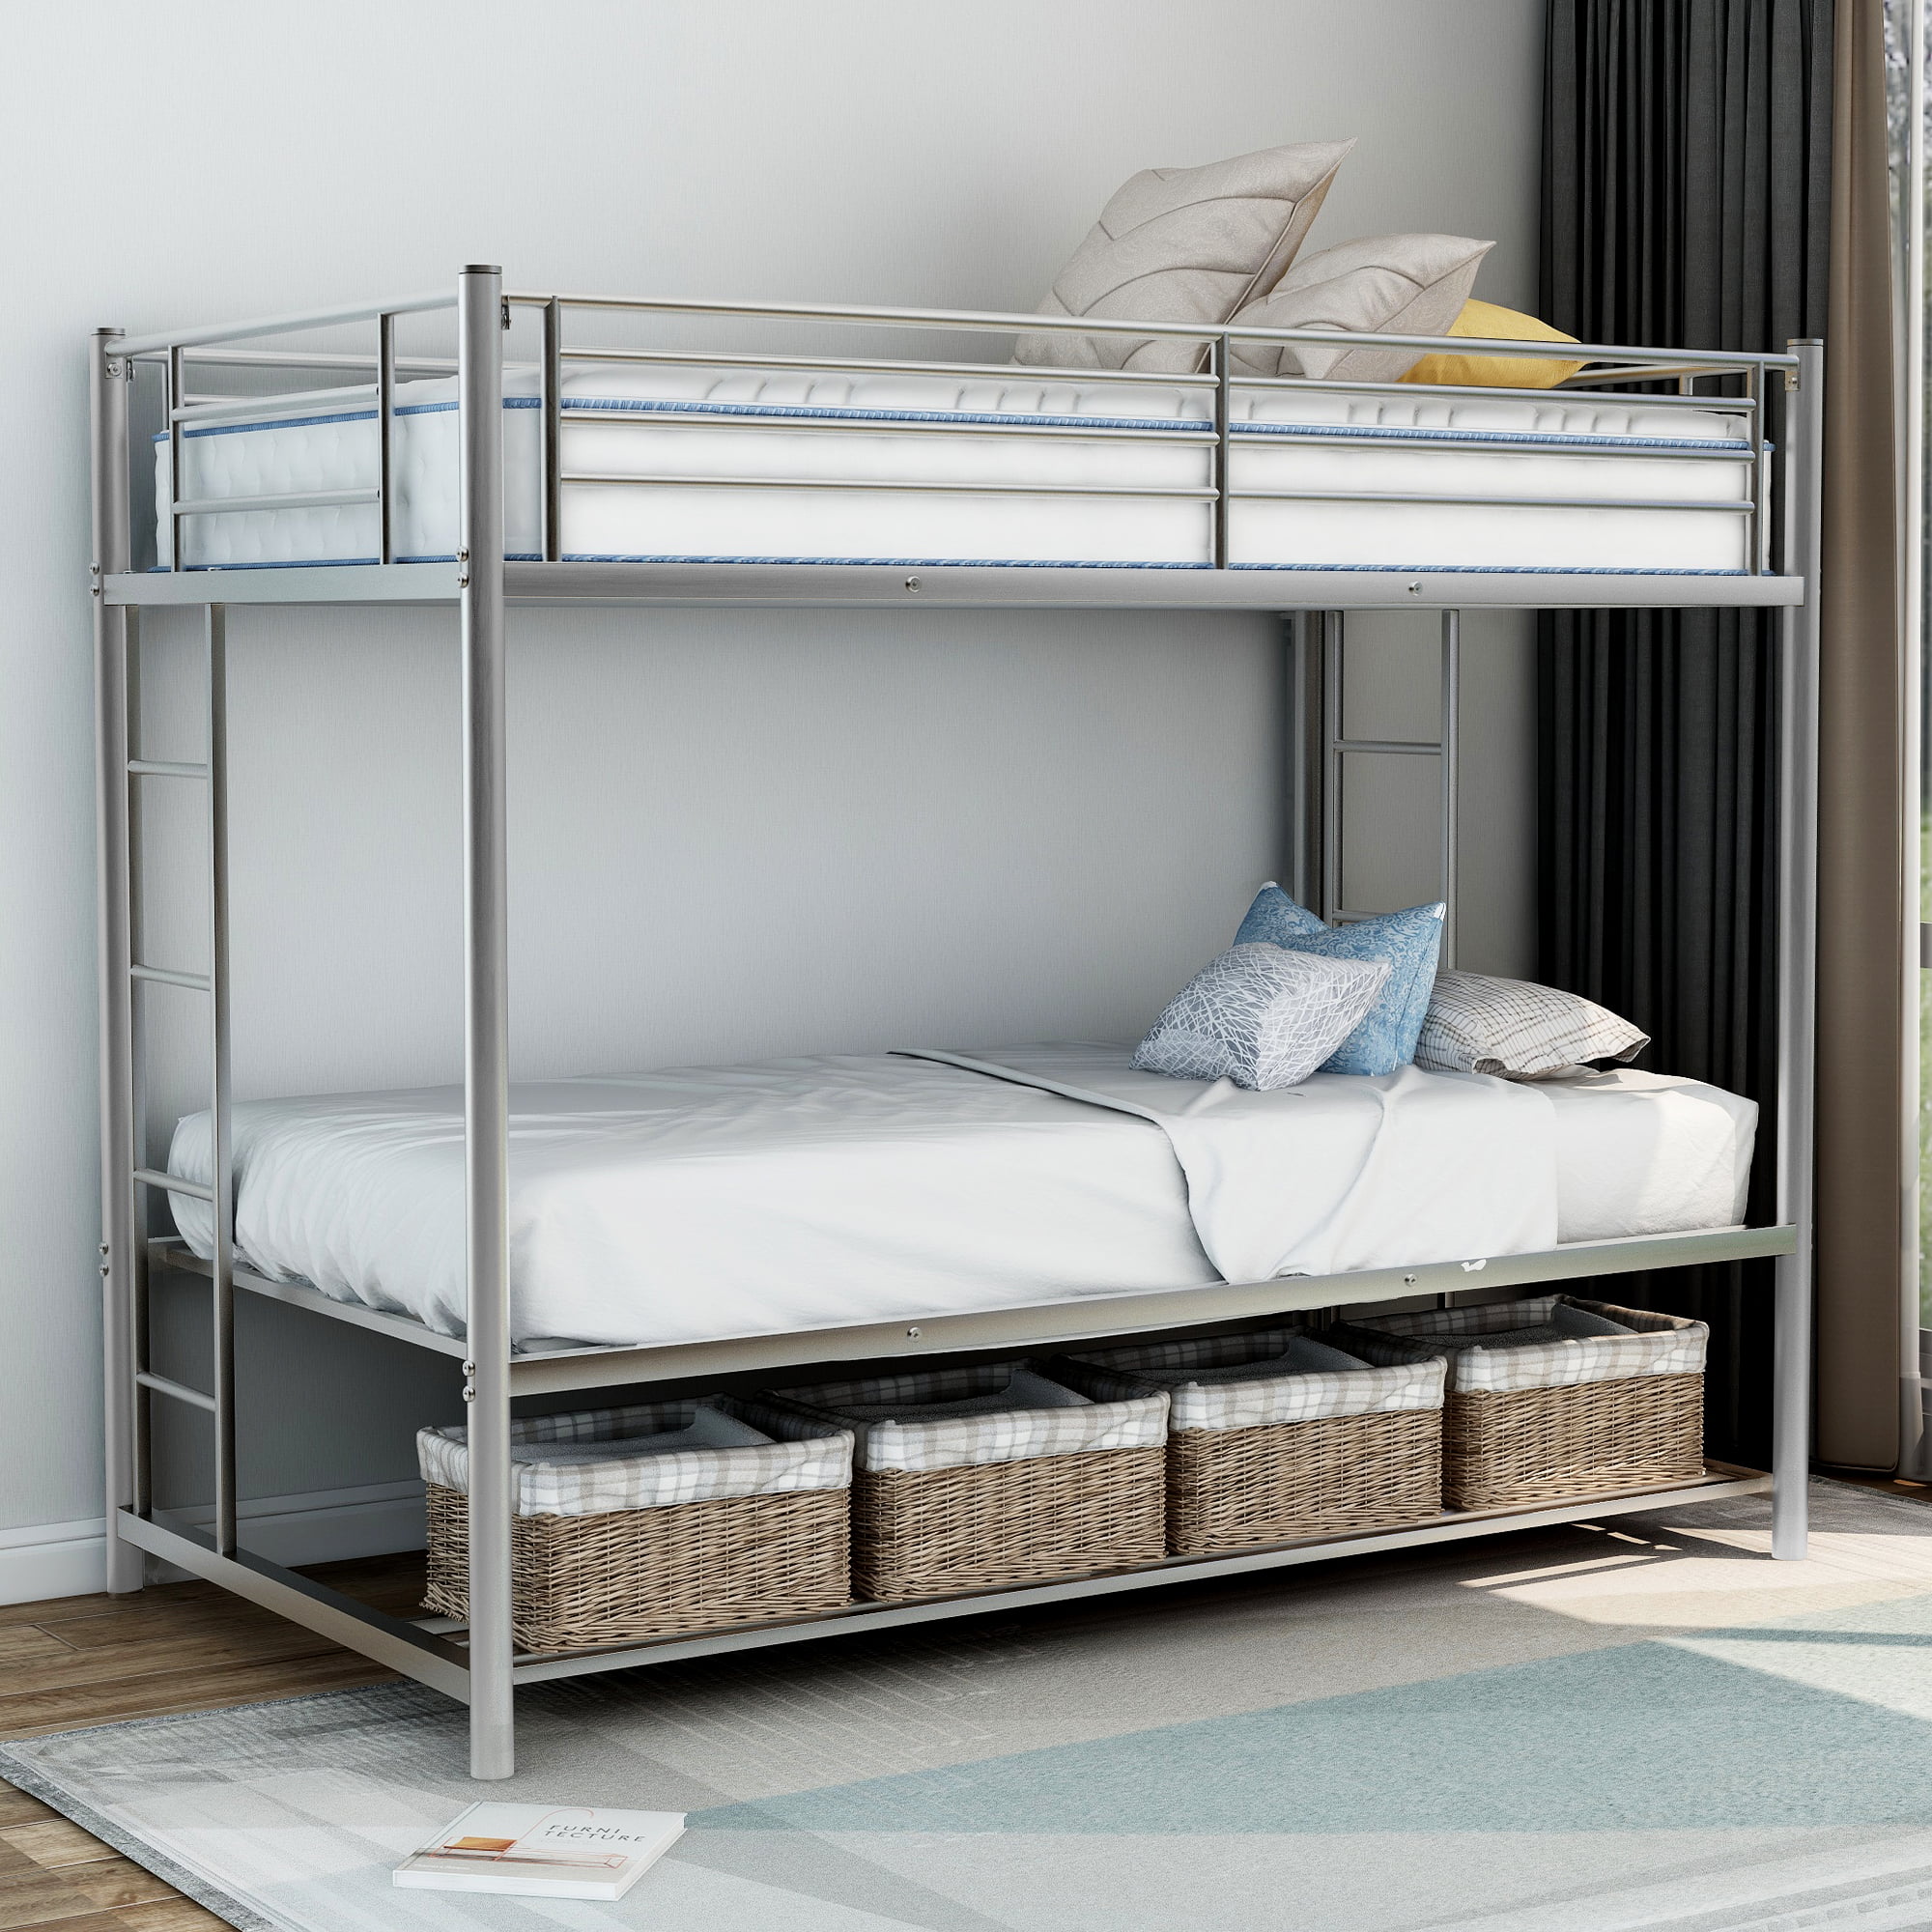 EUROCO Metal Twin Over Twin Bunk Bed Frame With Storage Shelf, Silver